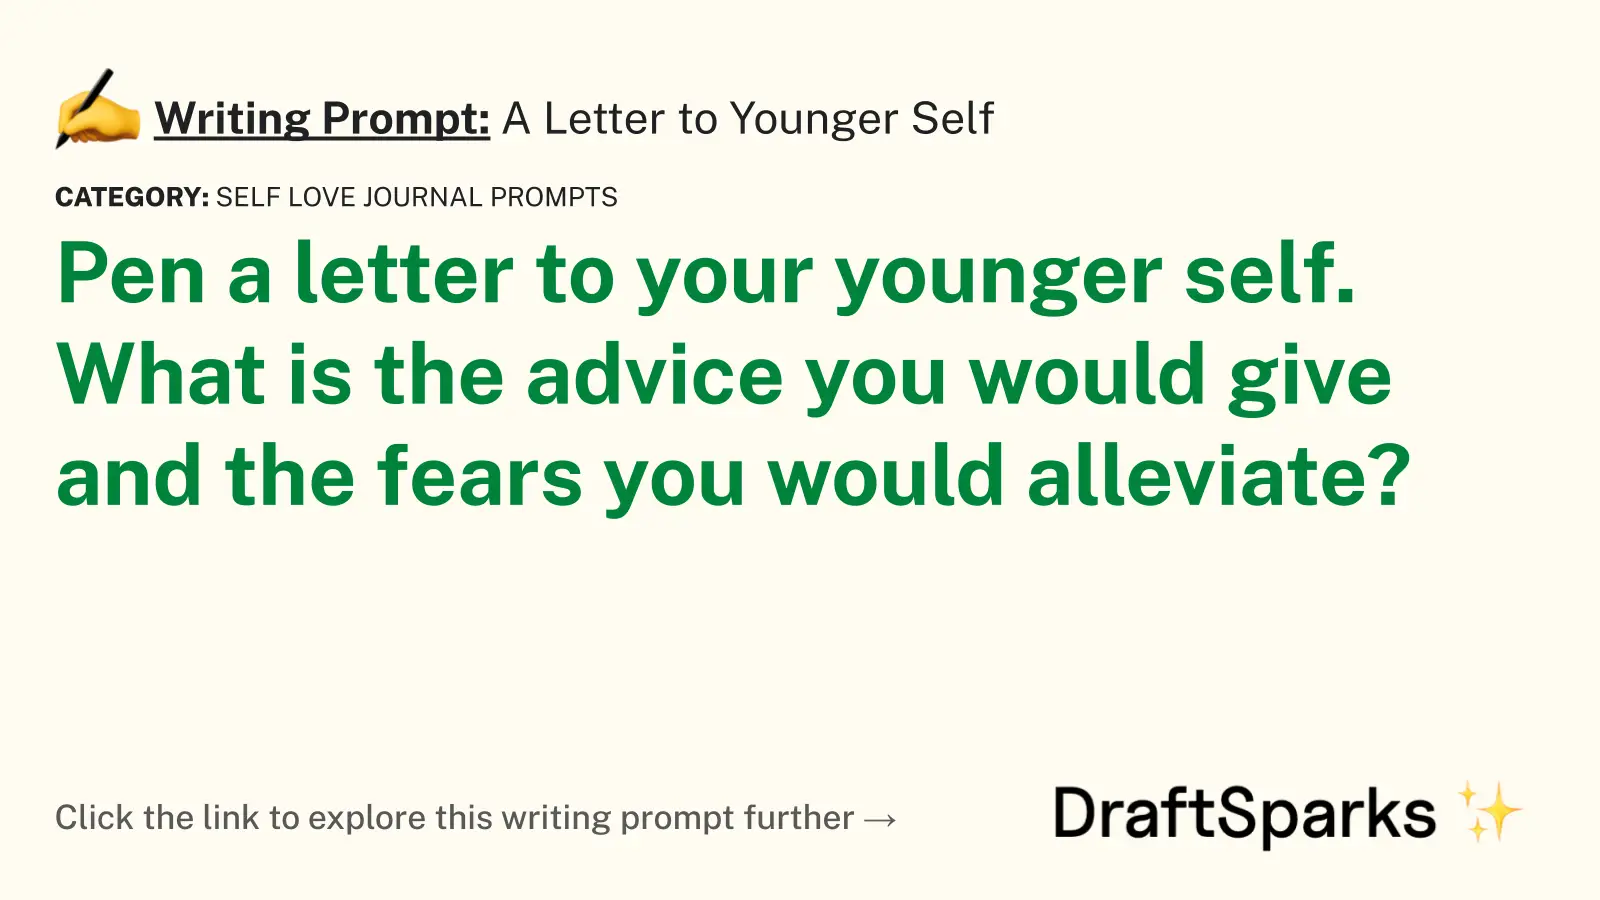 A Letter to Younger Self